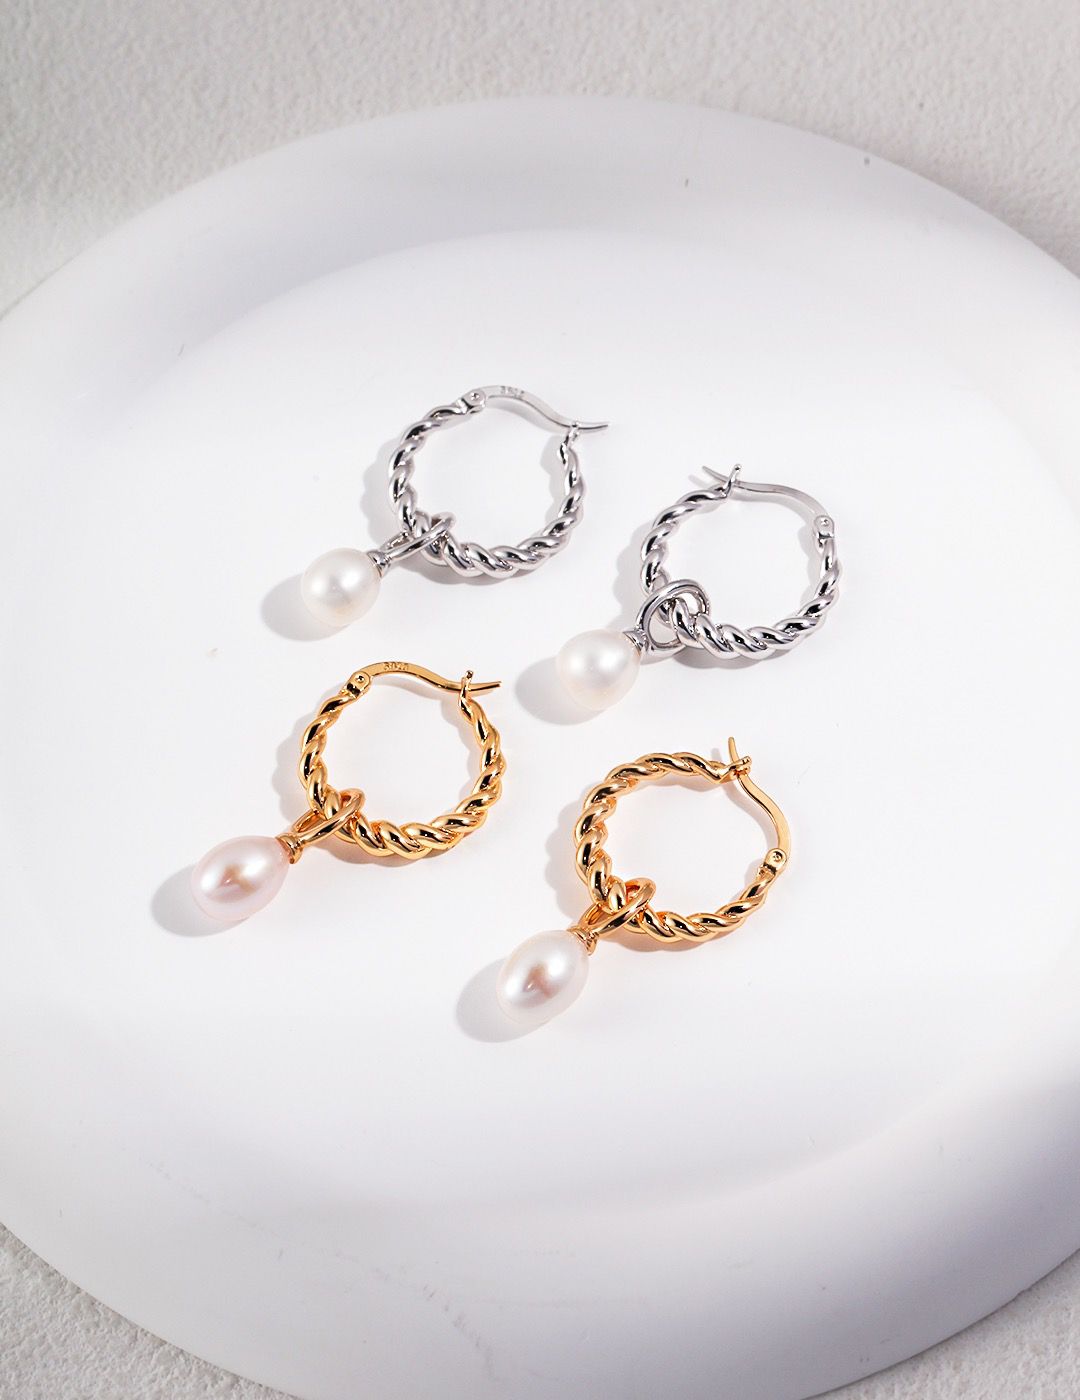 A close-up photo of Pearl Hoop Earrings on a white background.